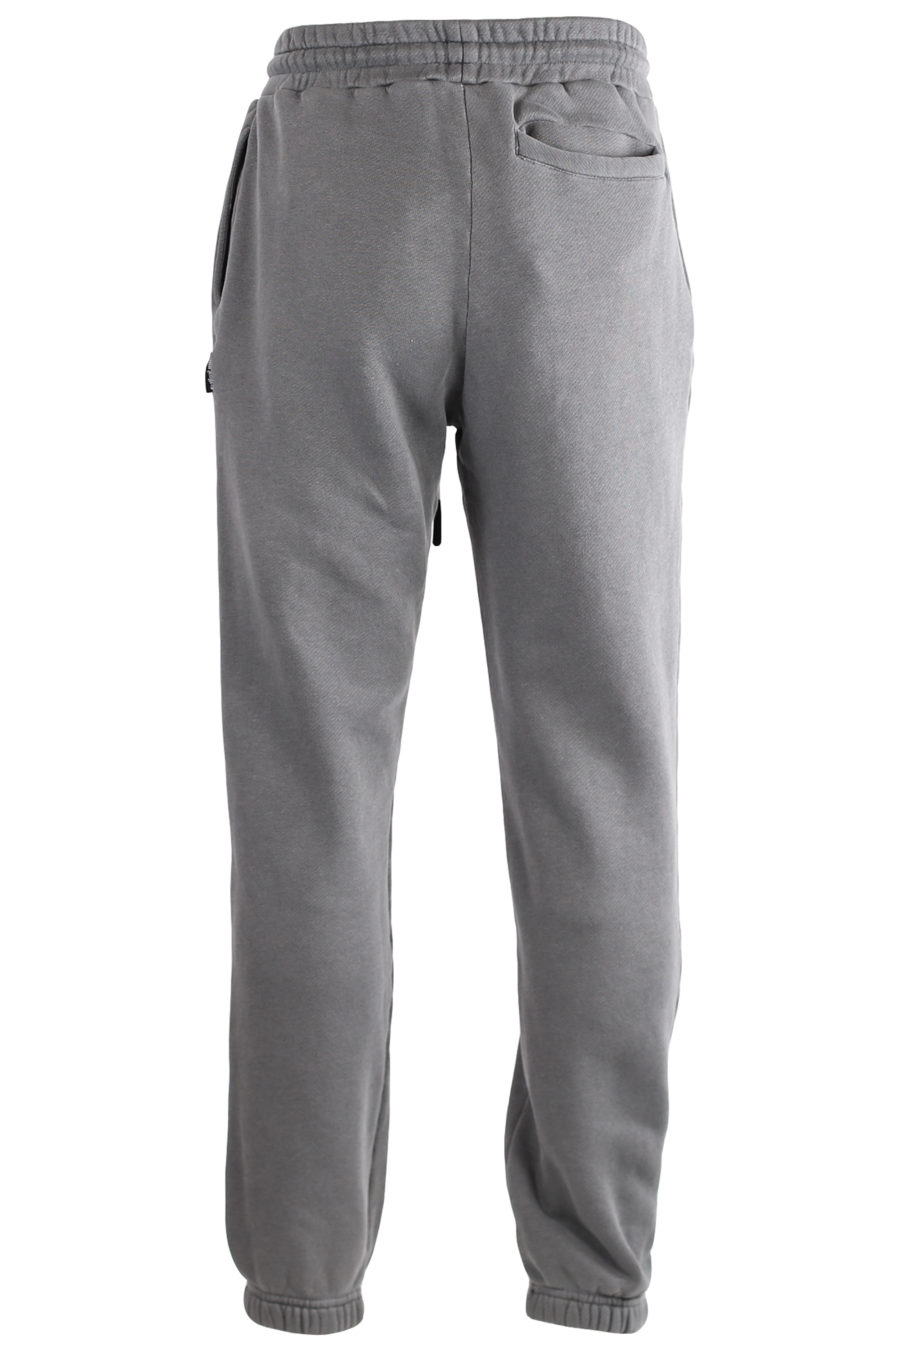 Tracksuit bottoms grey with white logo - IMG 7271